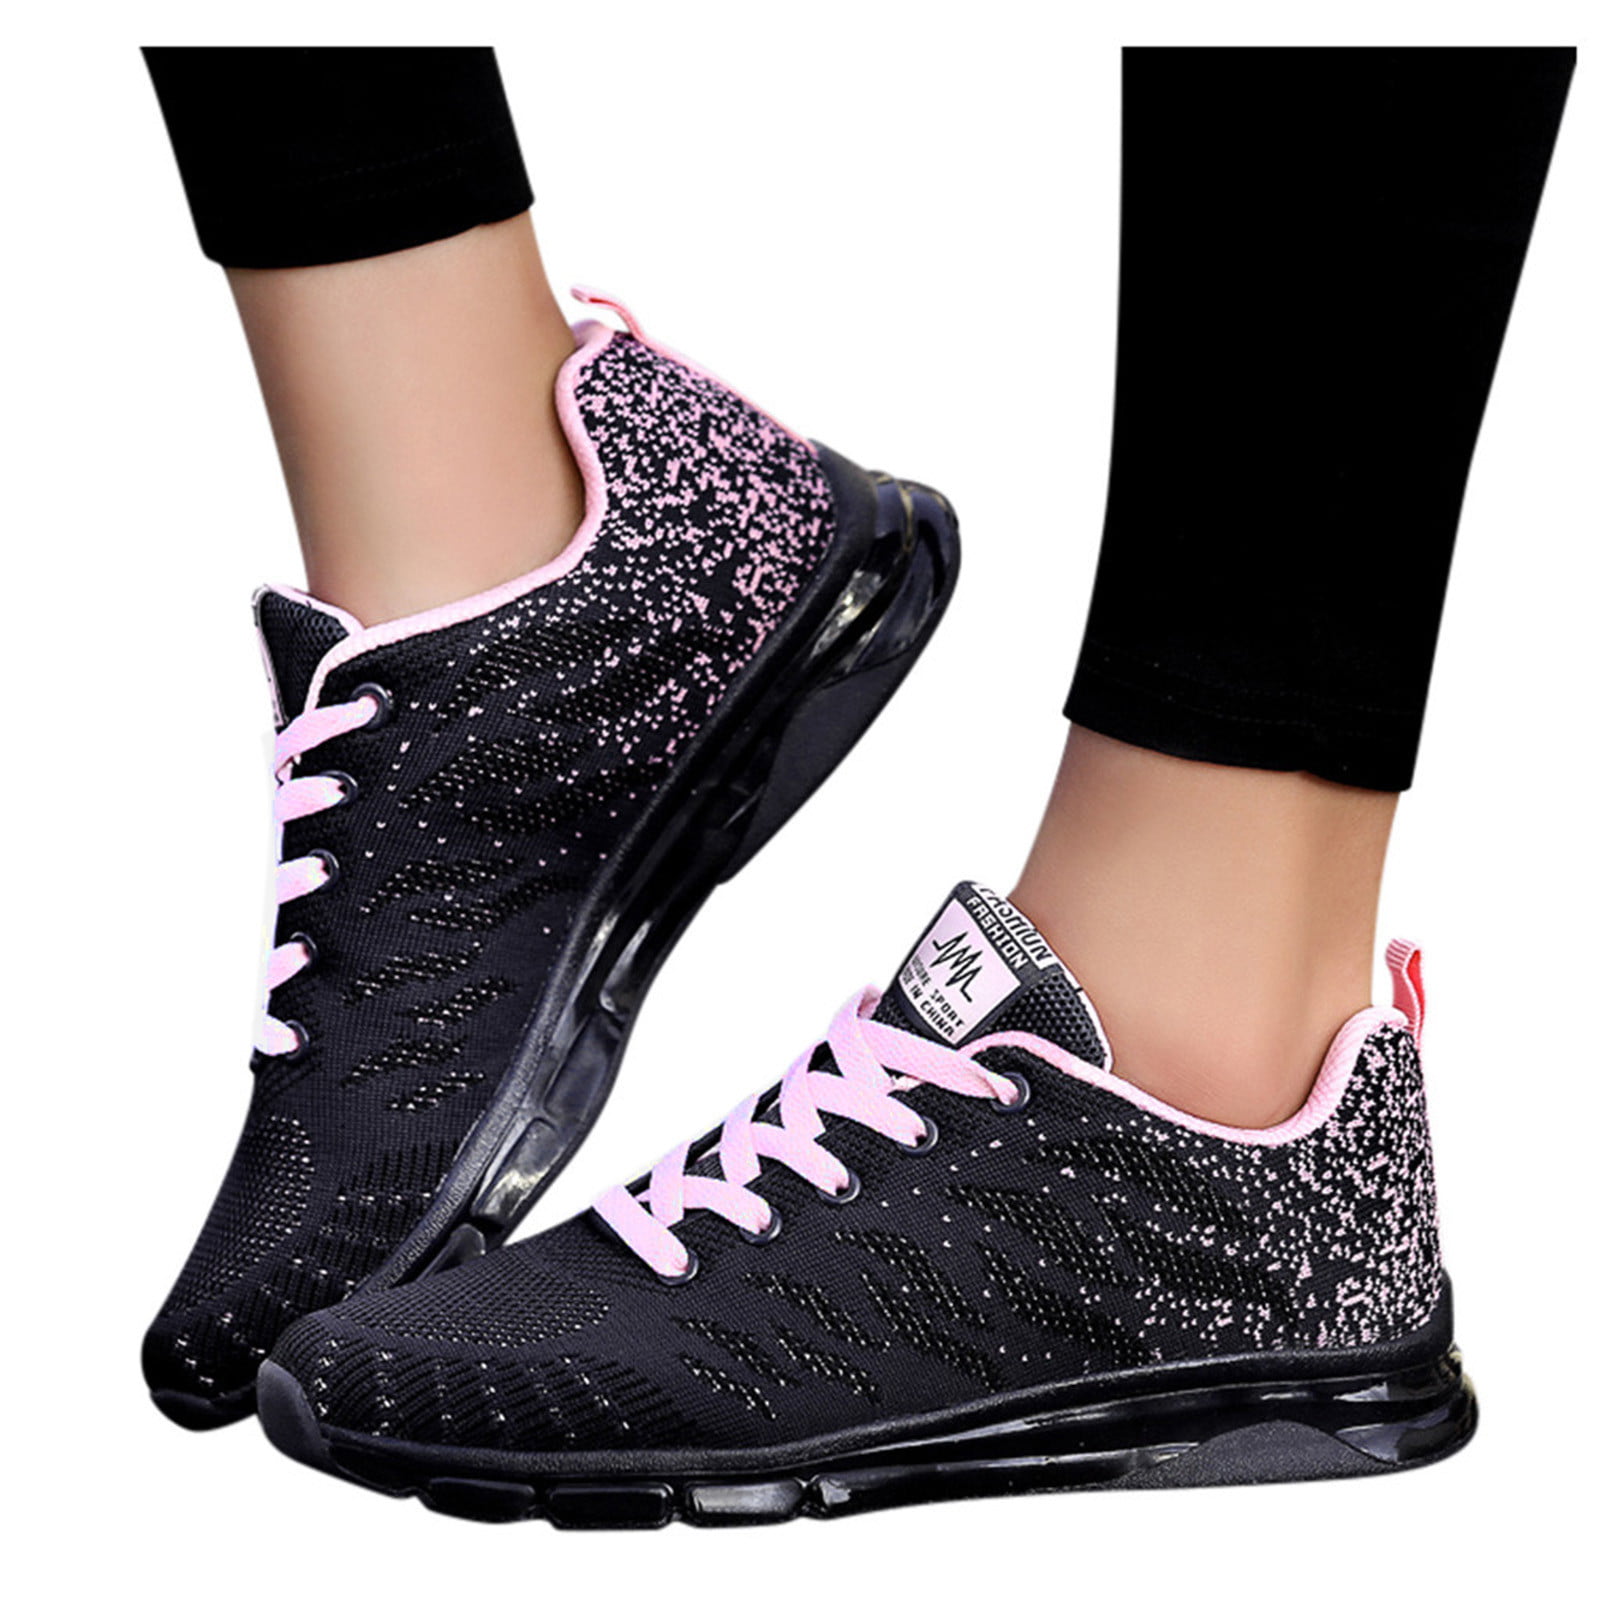 Women Fitness Gym Jogging Running Walking Shoes Lace Up Sports Athletic Sneakers 